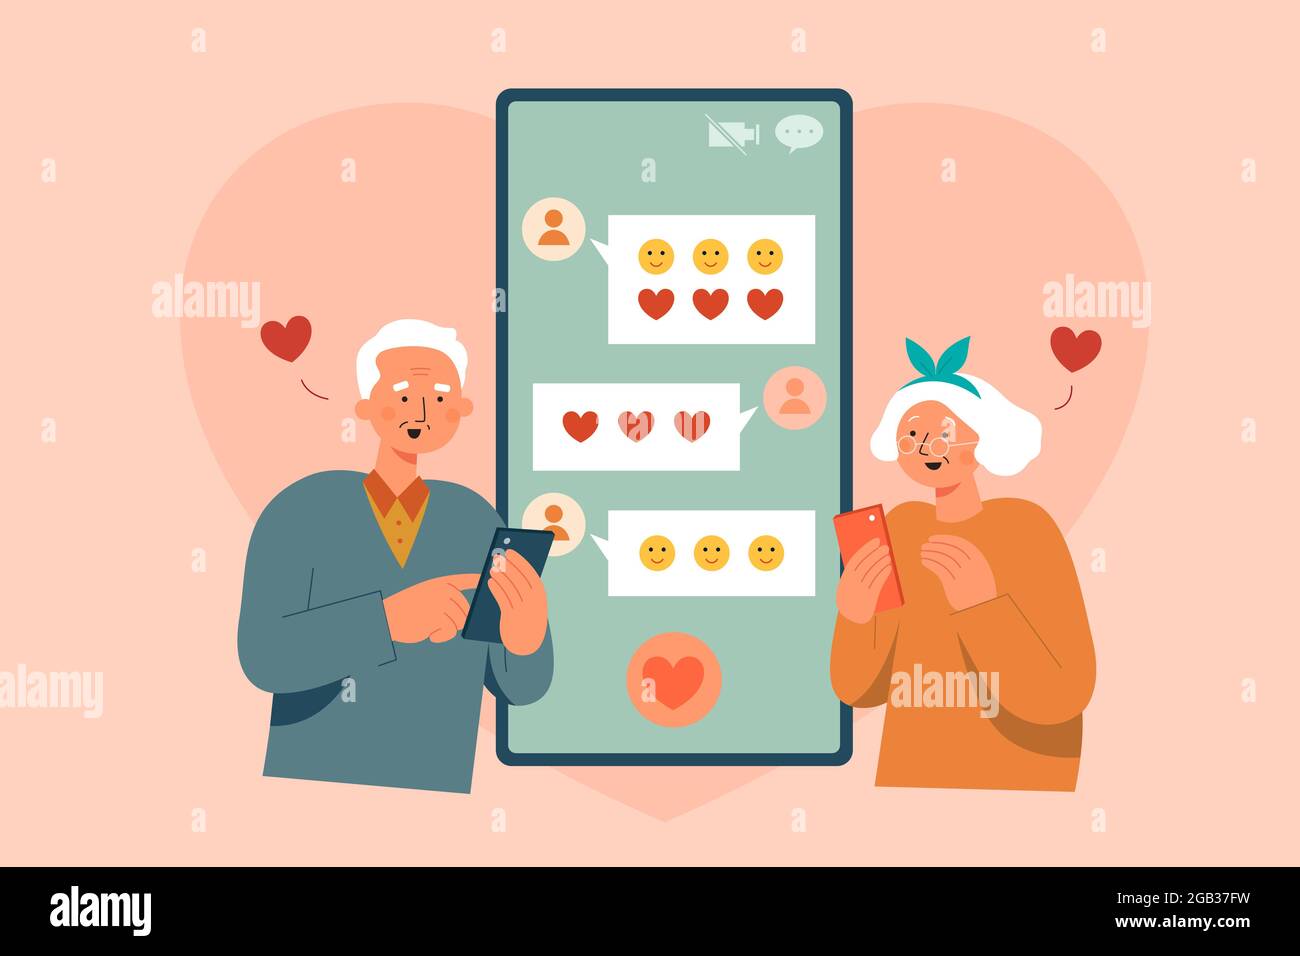 Flat style illustration of senior couple using sending loving message to each other with many emoticons Stock Vector